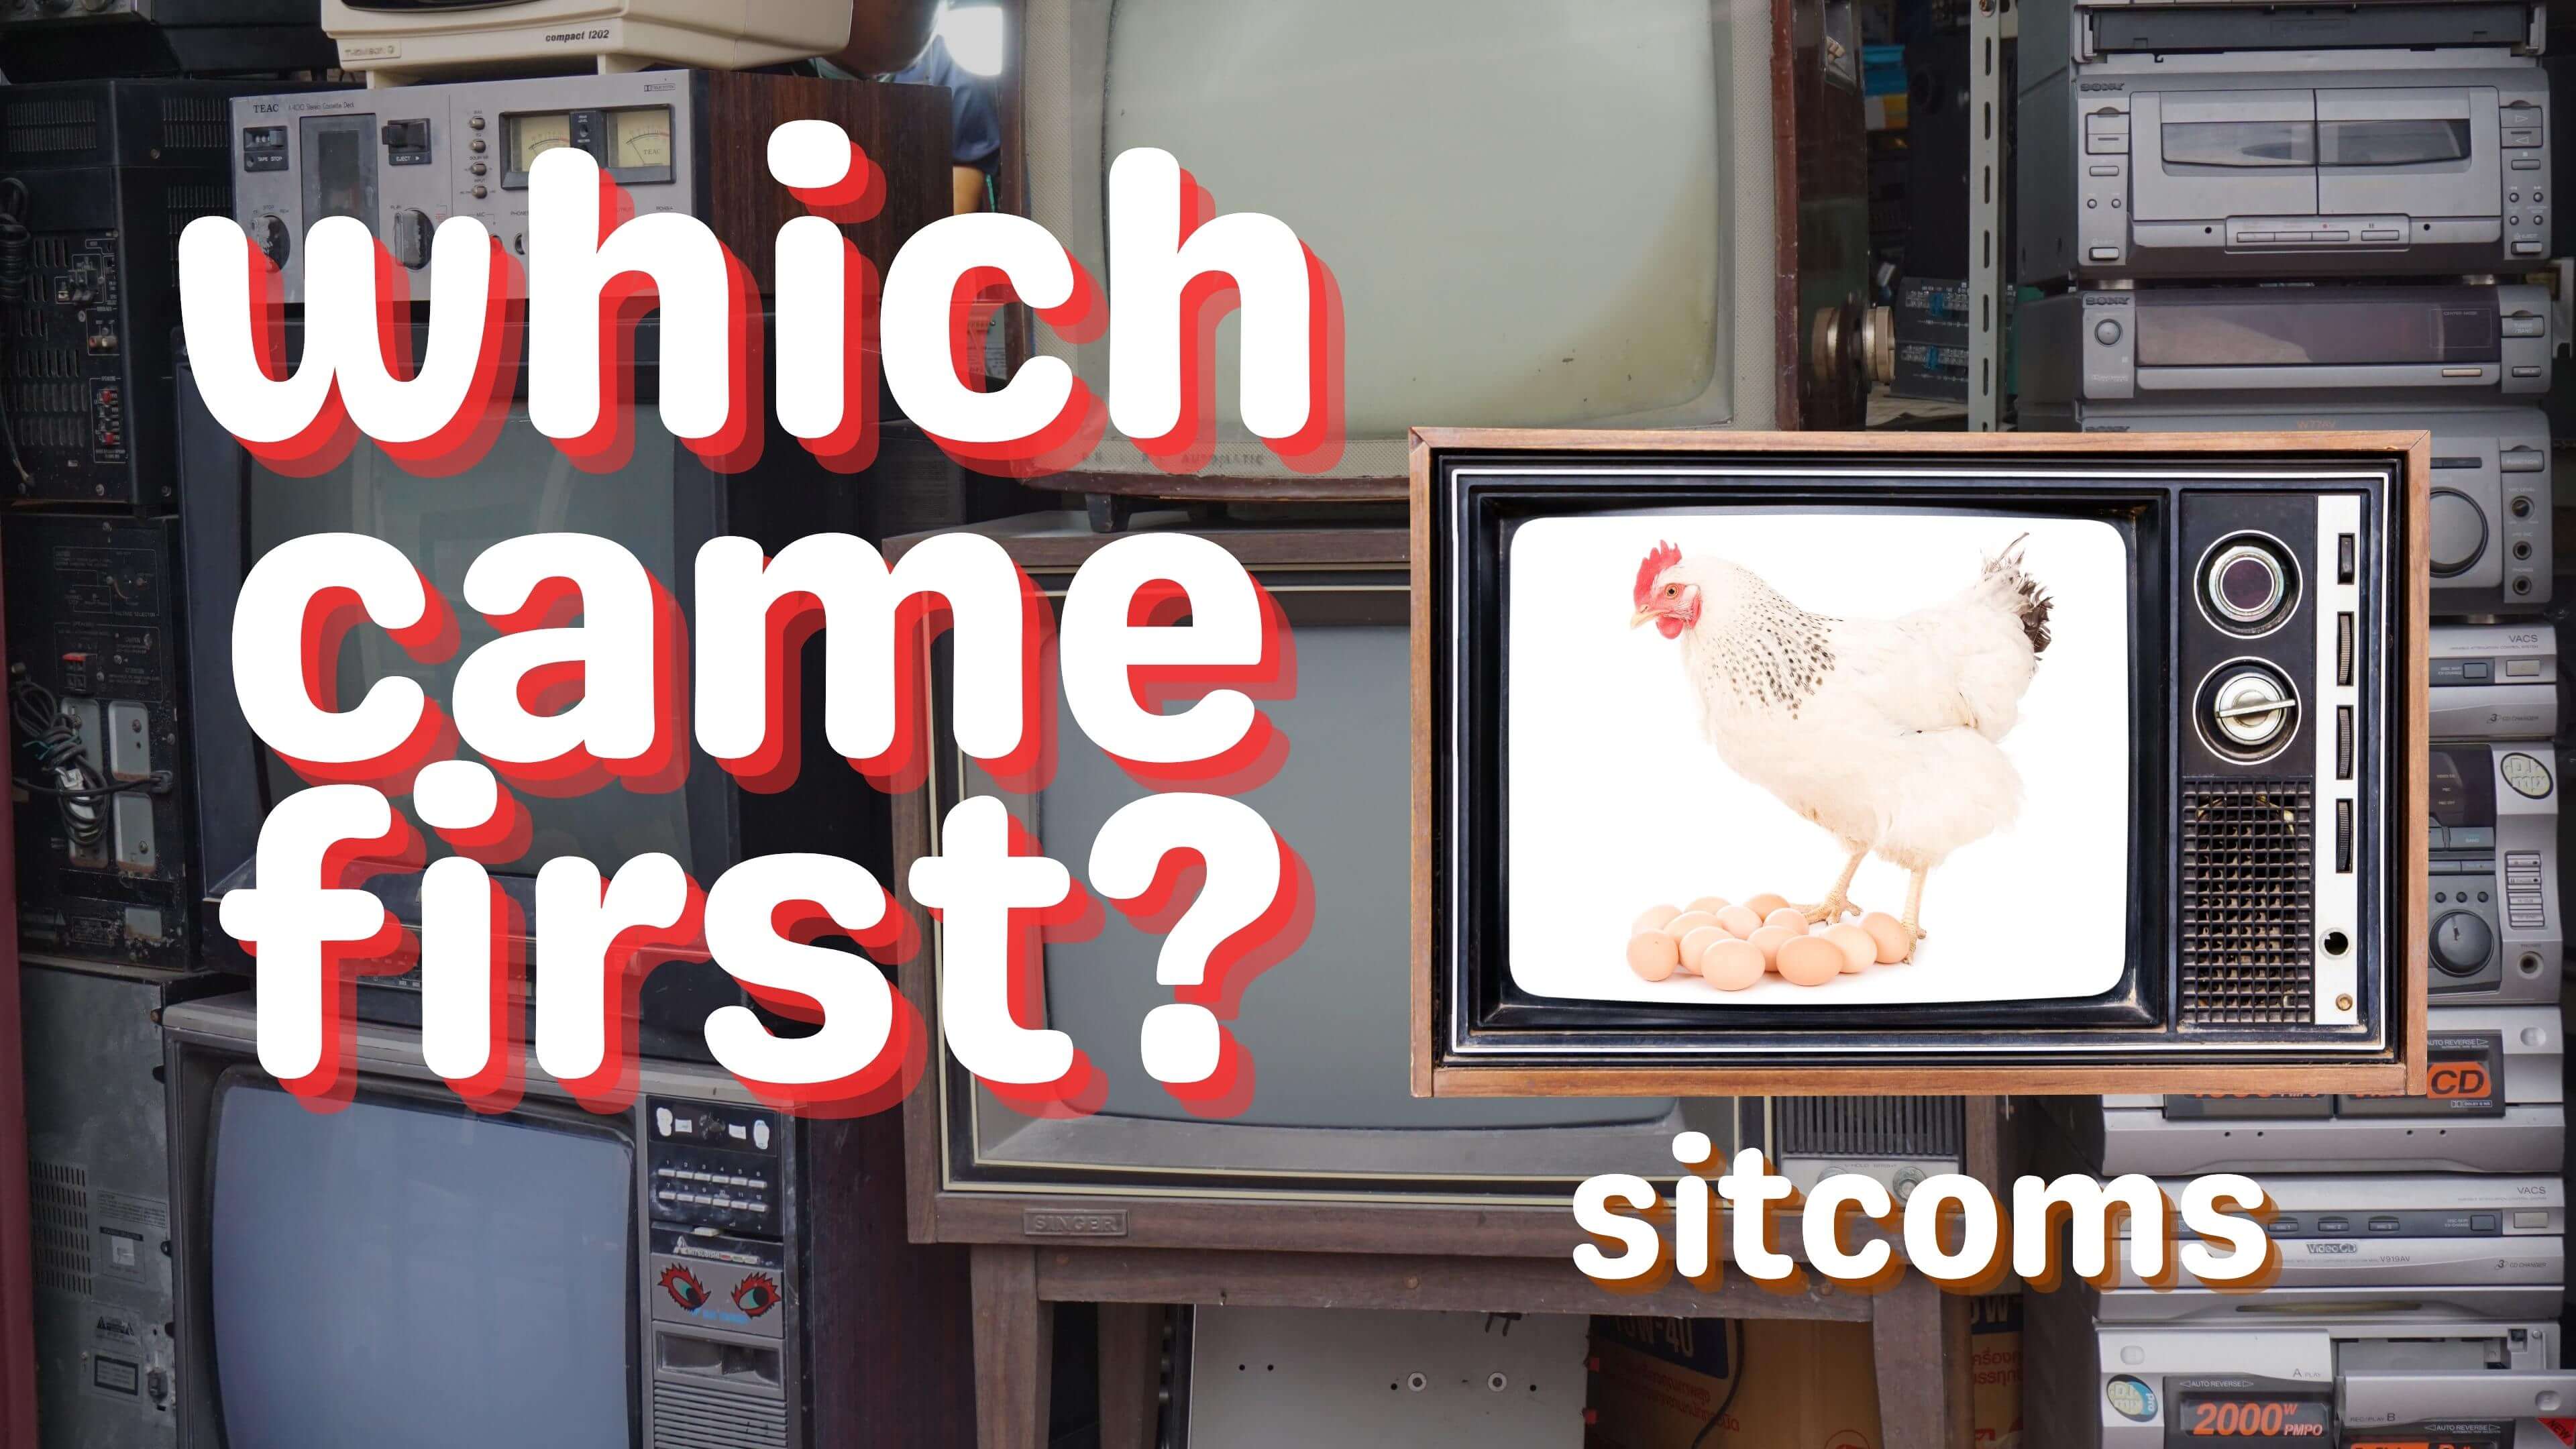 Which Came First: Sitcoms